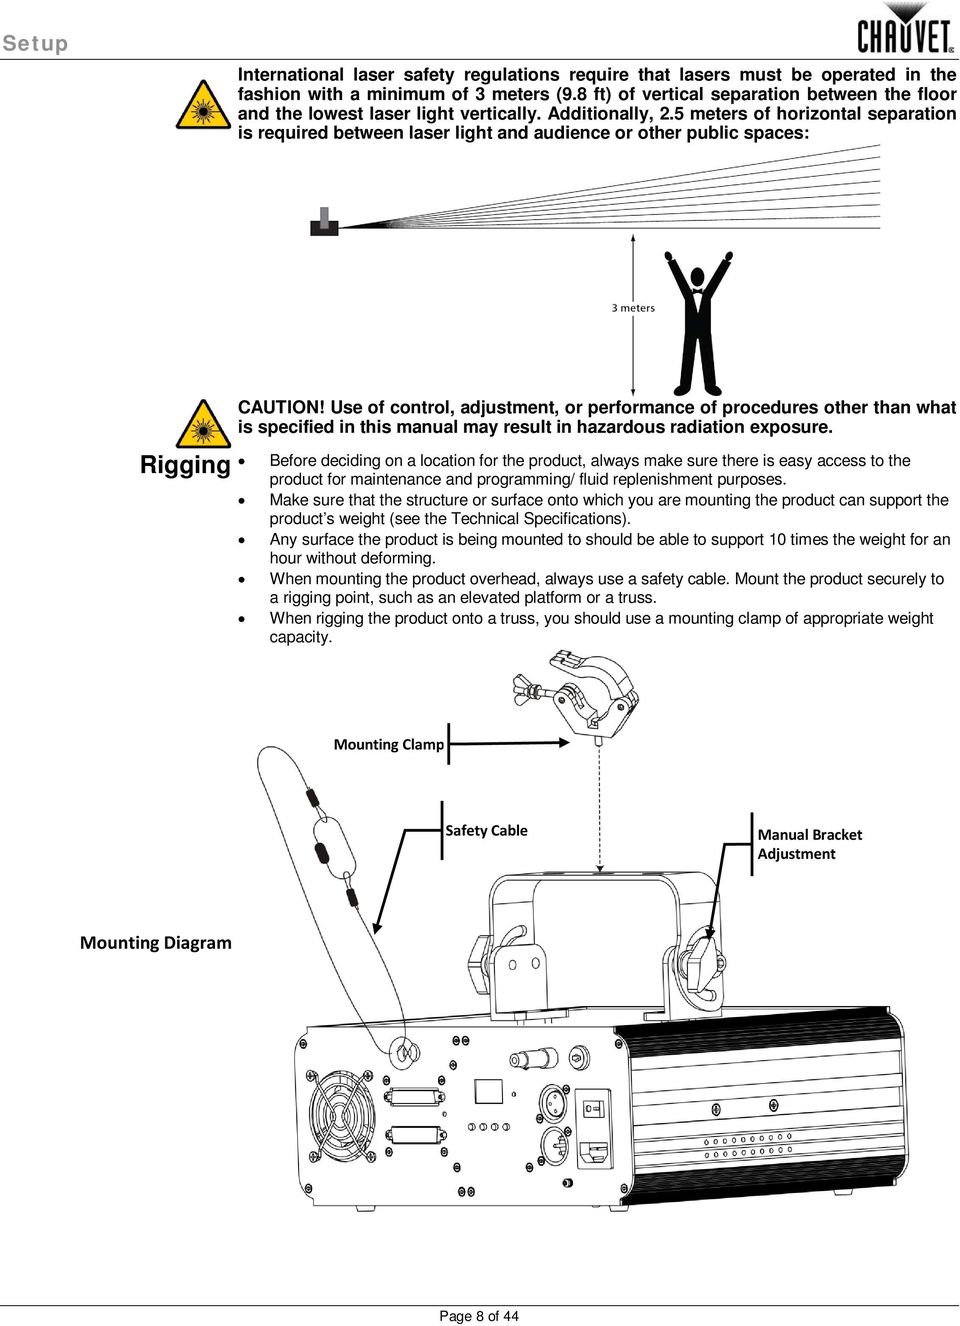 5 meters of horizontal separation is required between laser light and audience or other public spaces: Rigging CAUTION!